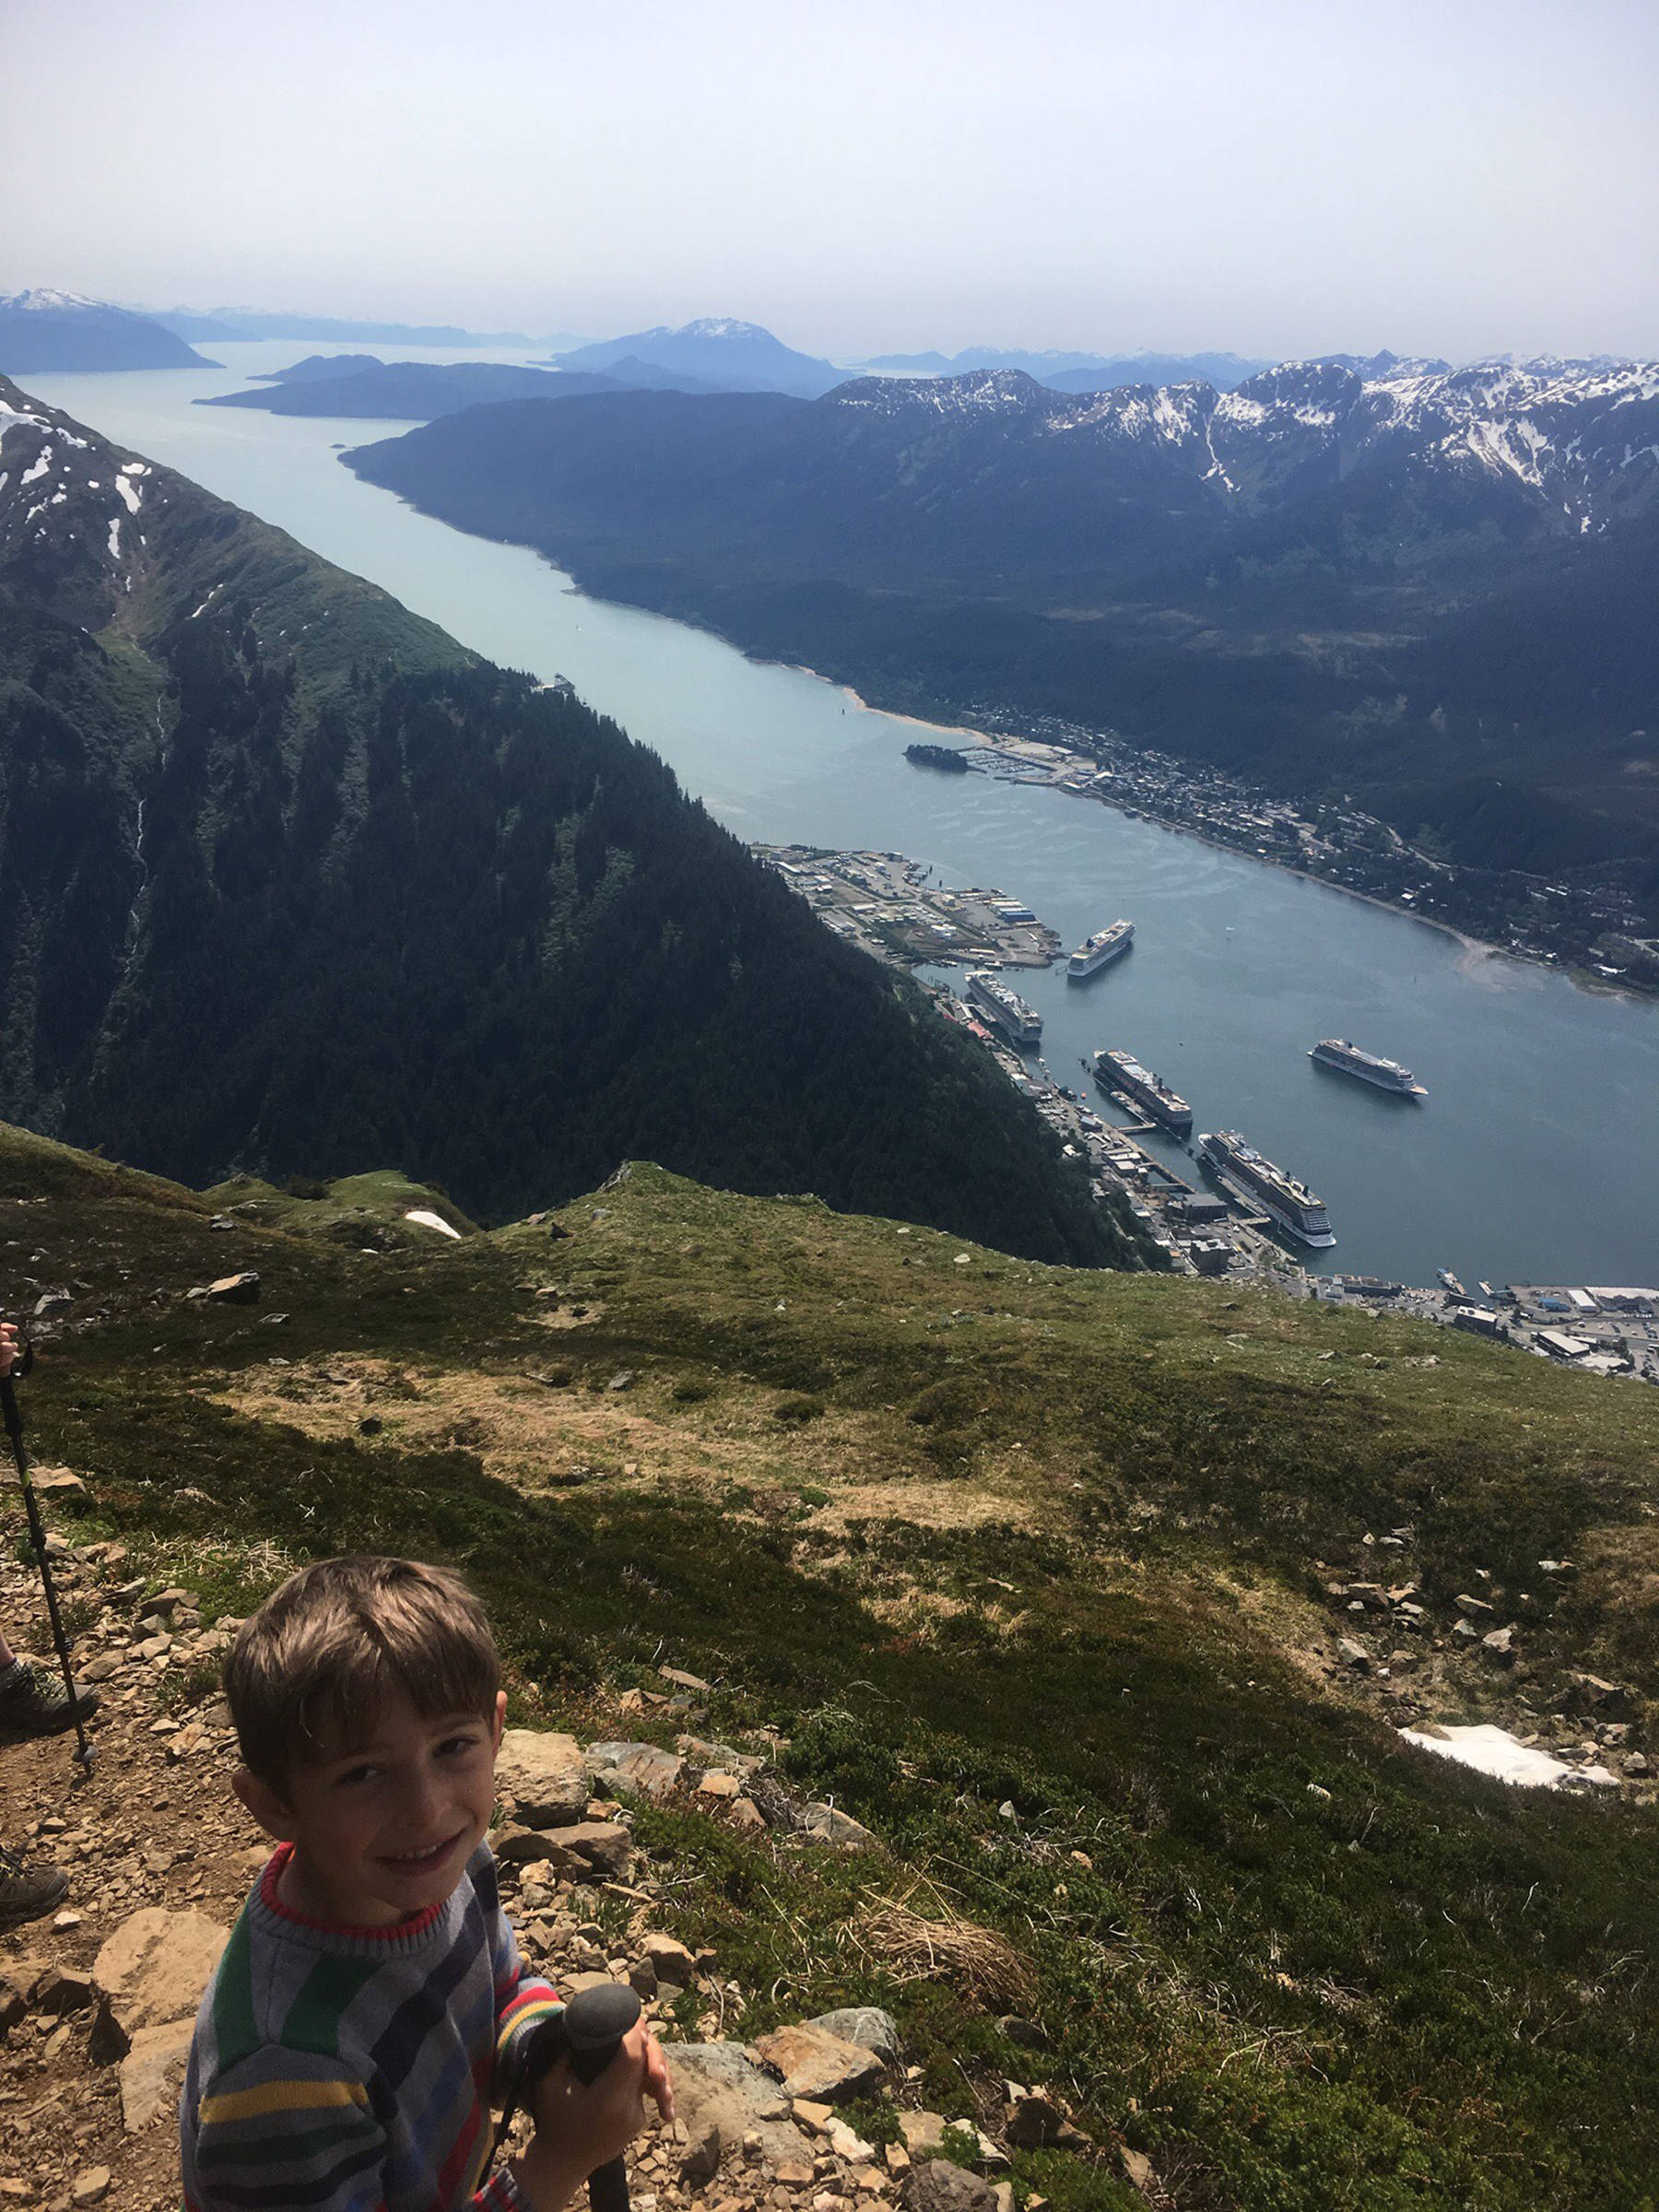 Rowan Taintor on top of Mount Juneau on Thursday, May 30, 2019. (Courtesy Photo | Shireen Taintor)